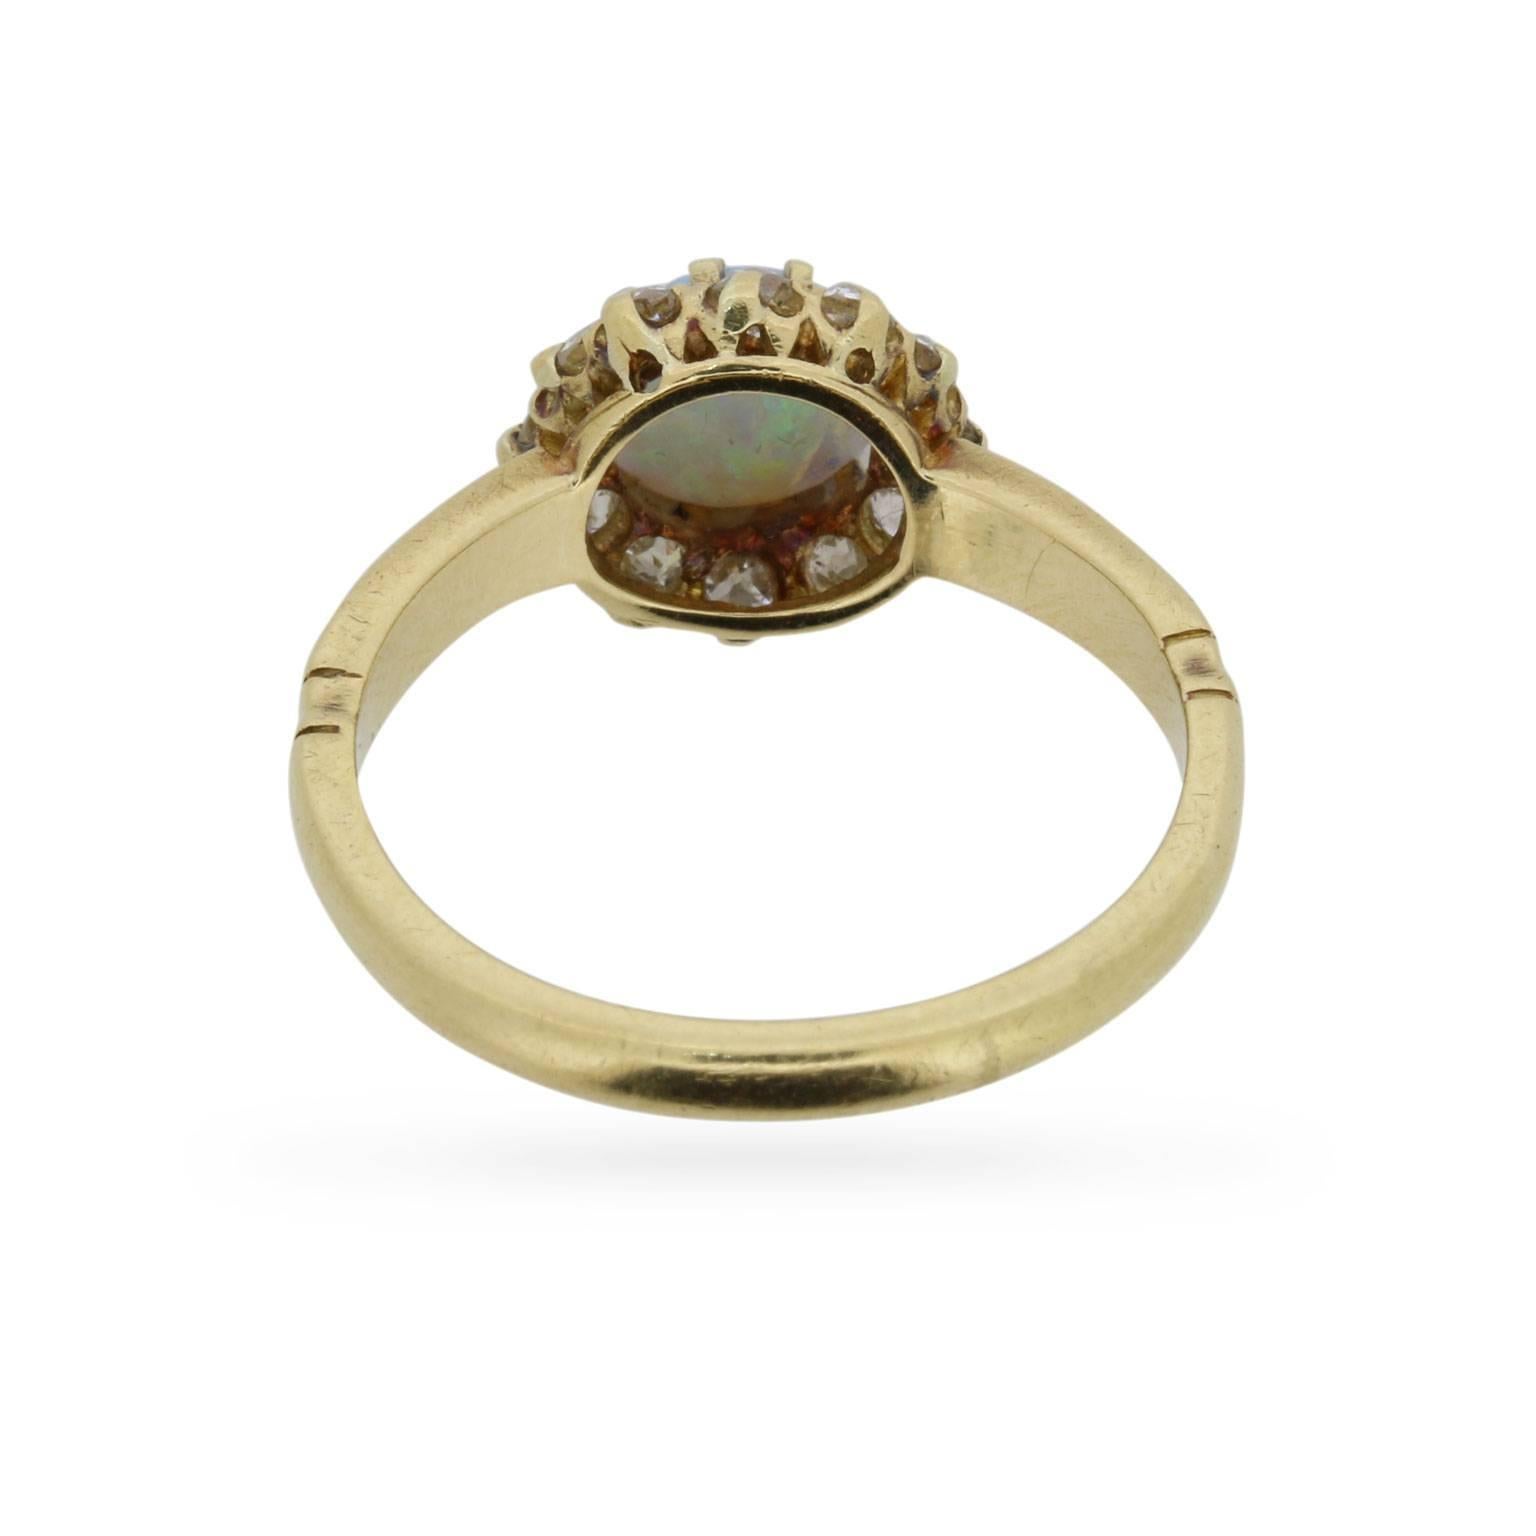 Women's or Men's Victorian Opal and Old Cut Diamond Yellow Gold Cluster Ring, circa 1880s